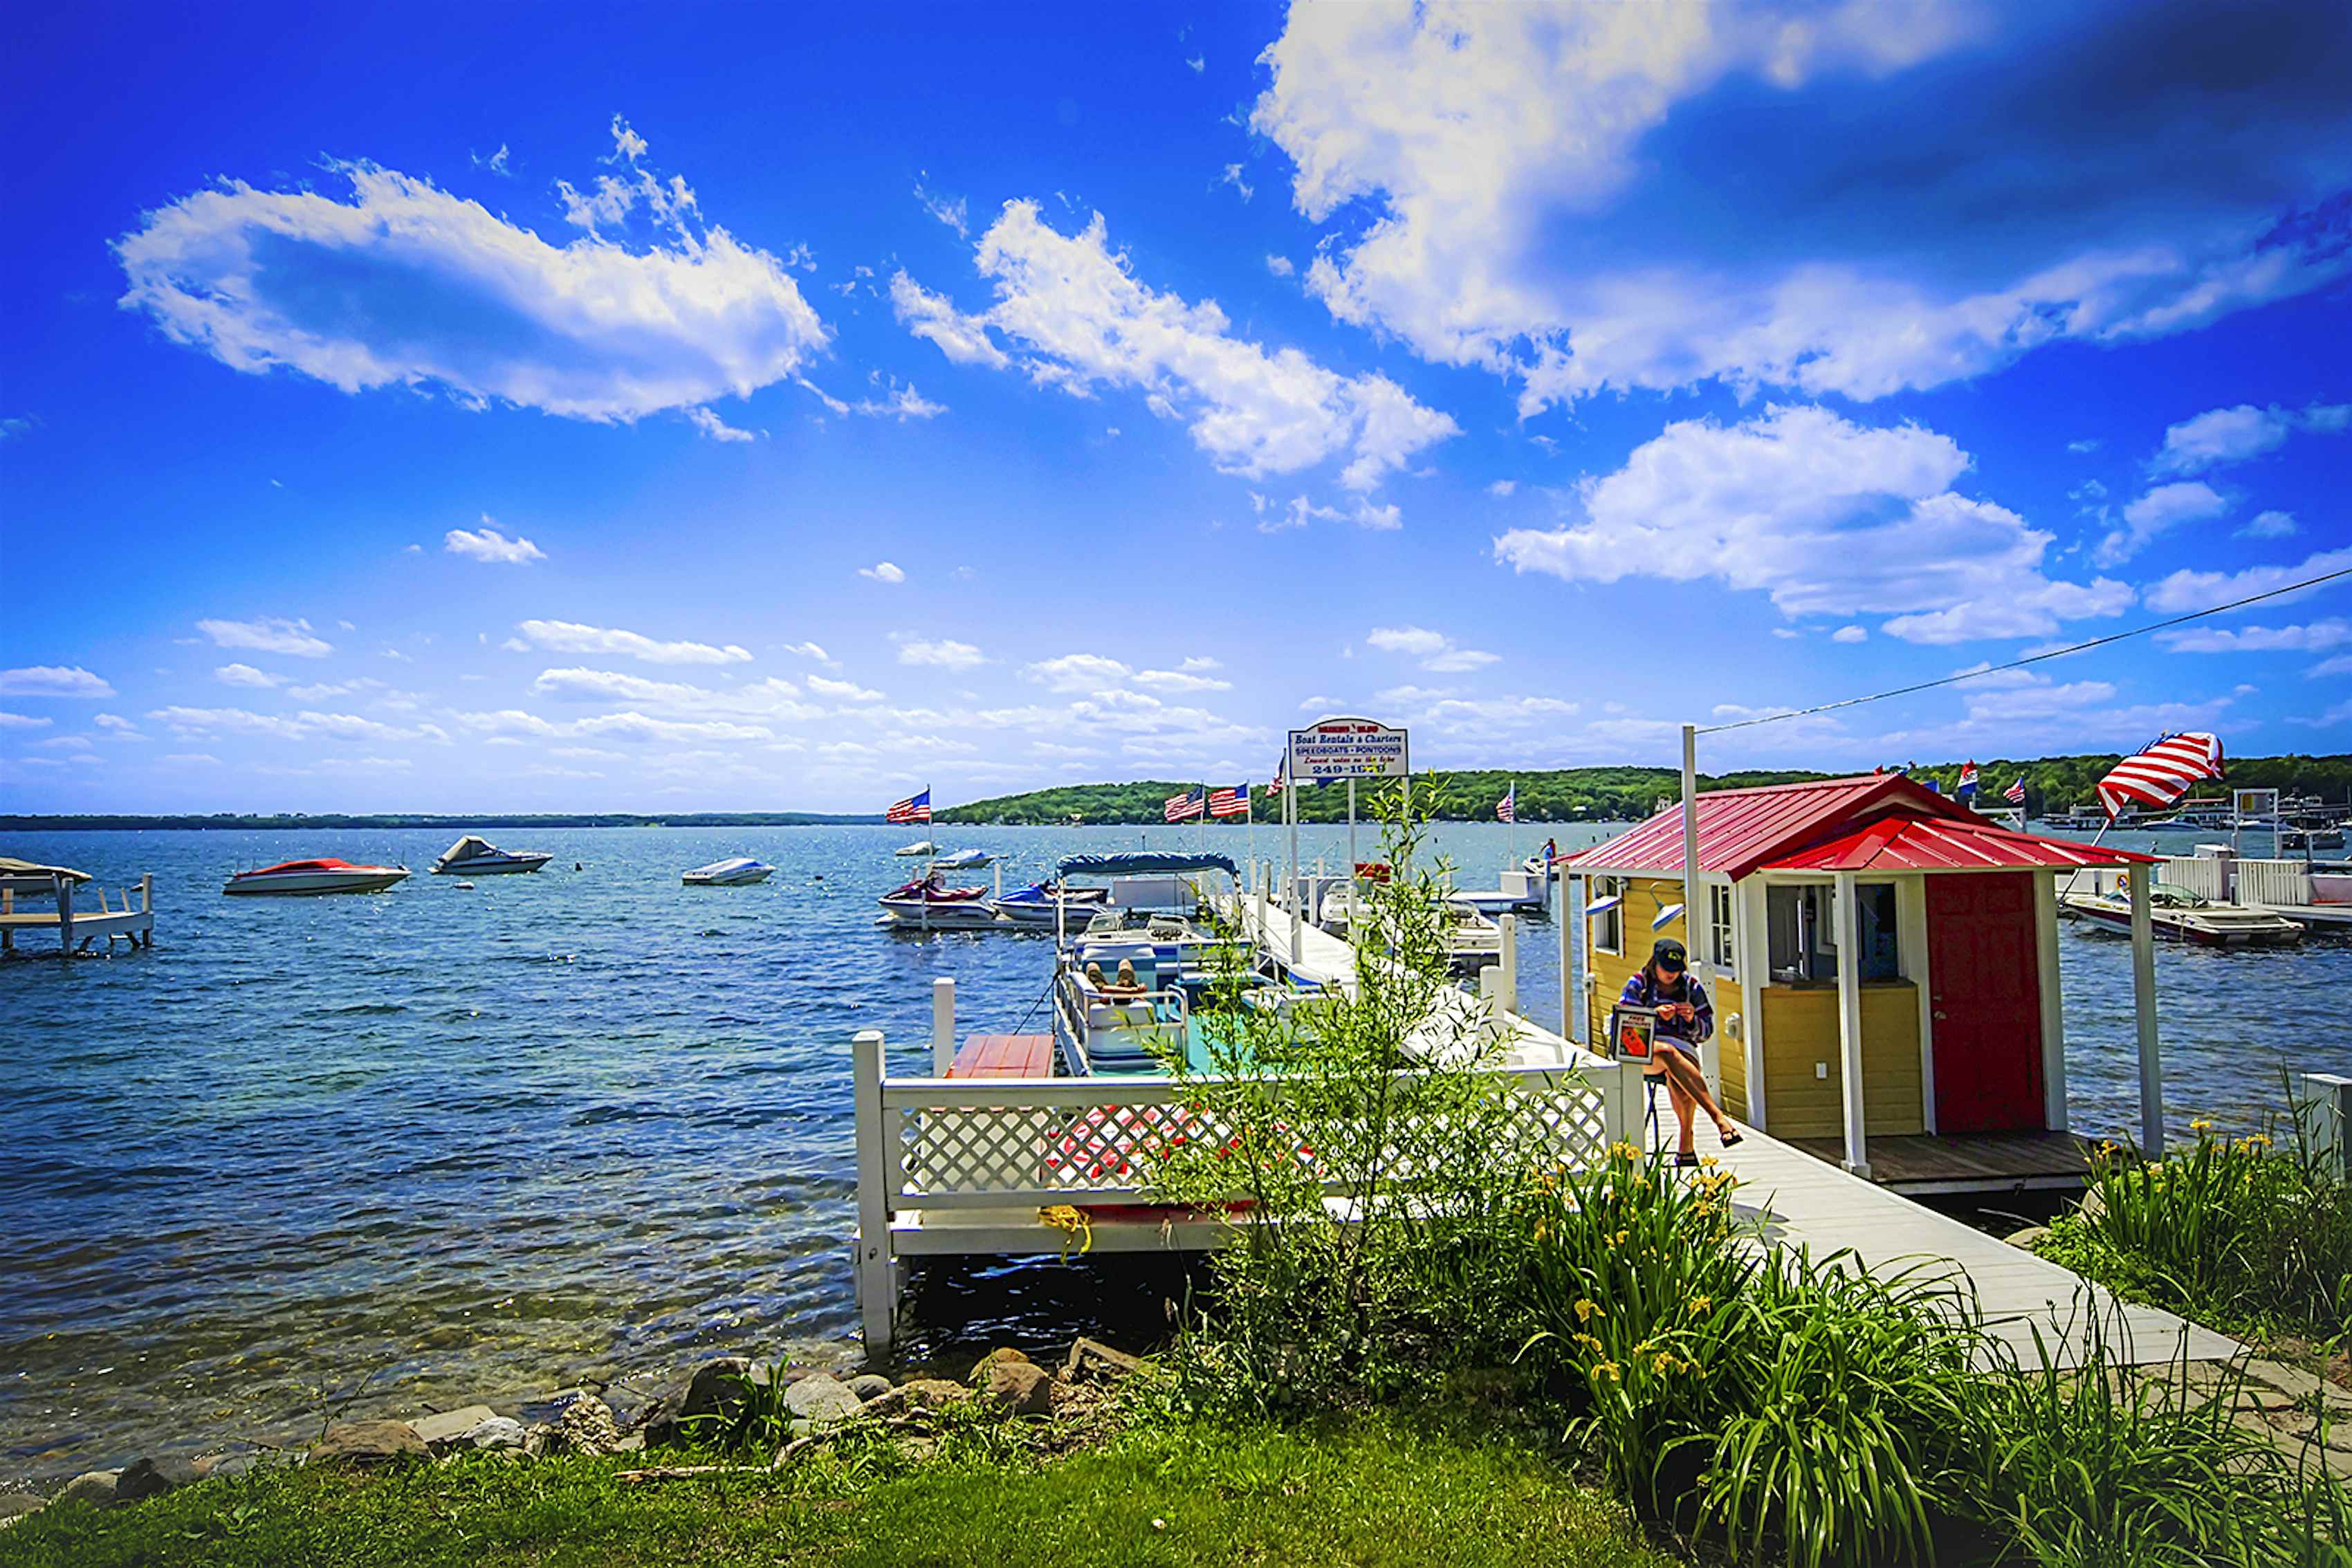 Make a great escape to Wisconsin’s Geneva Lake Lonely